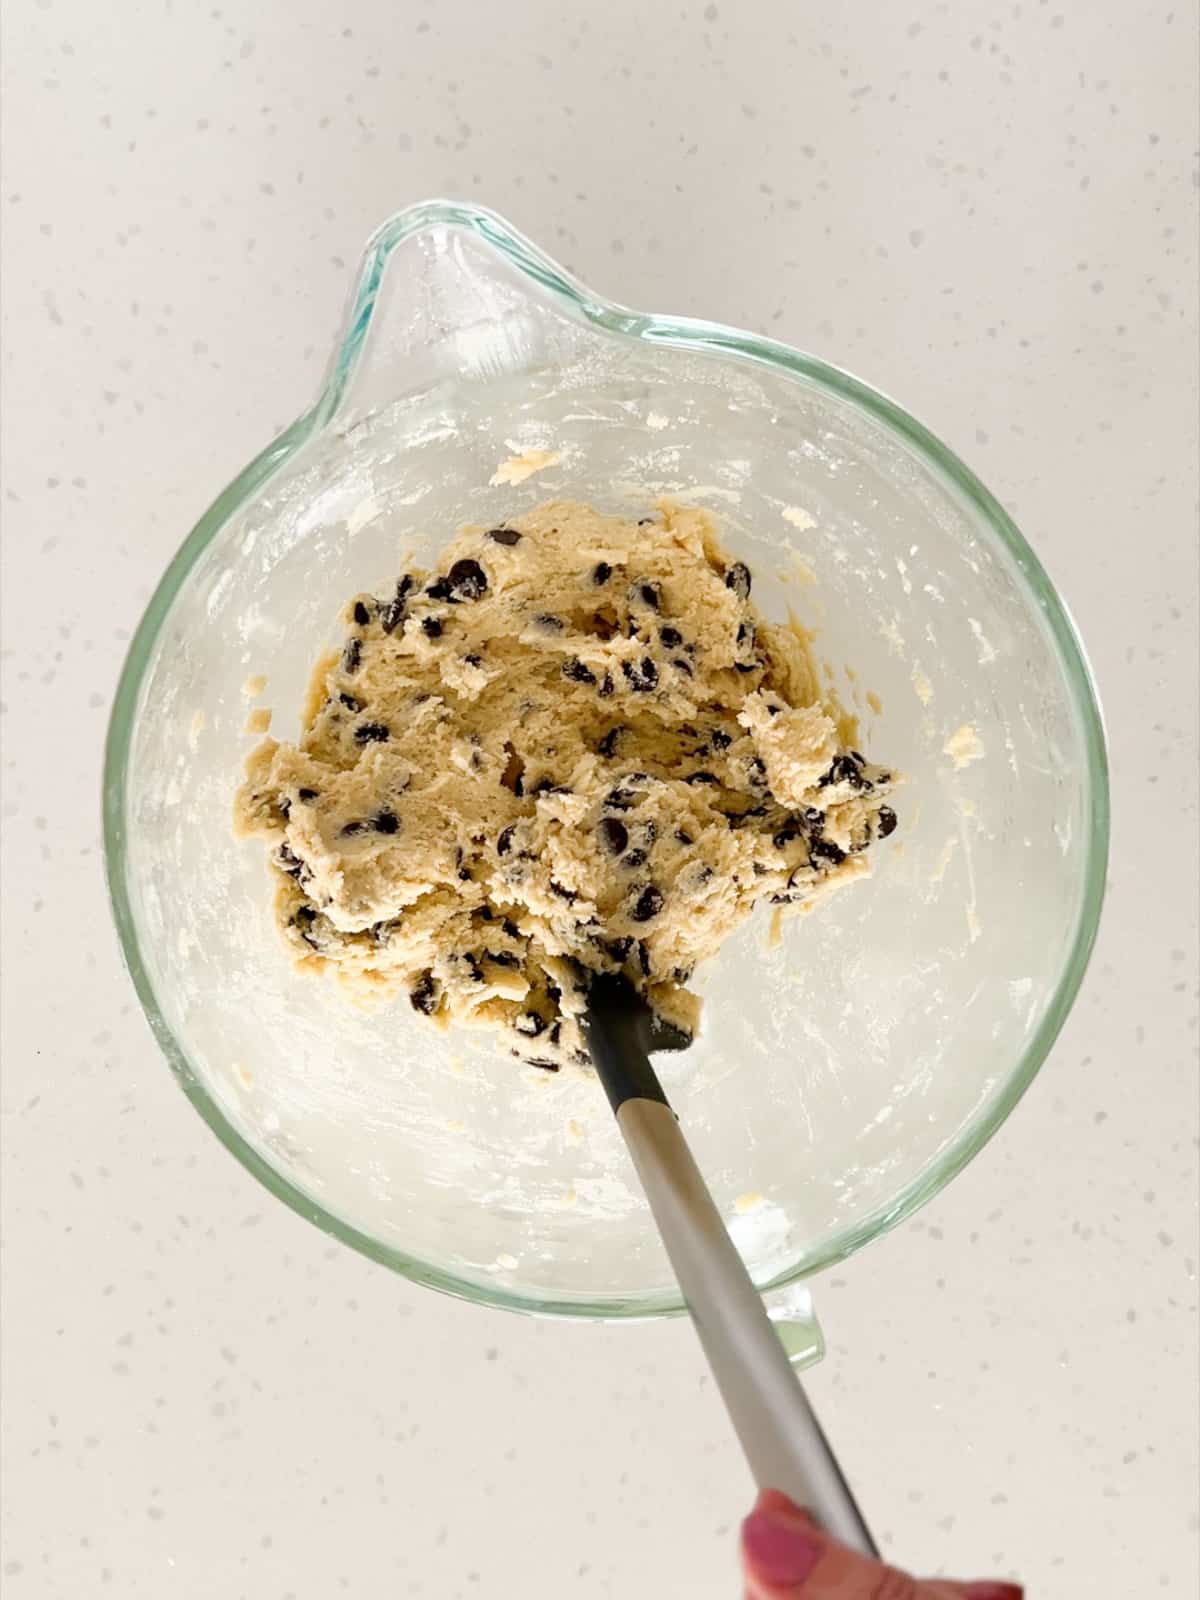 The wet and dry ingredients are mixed together and the chocolate chips are folded in.